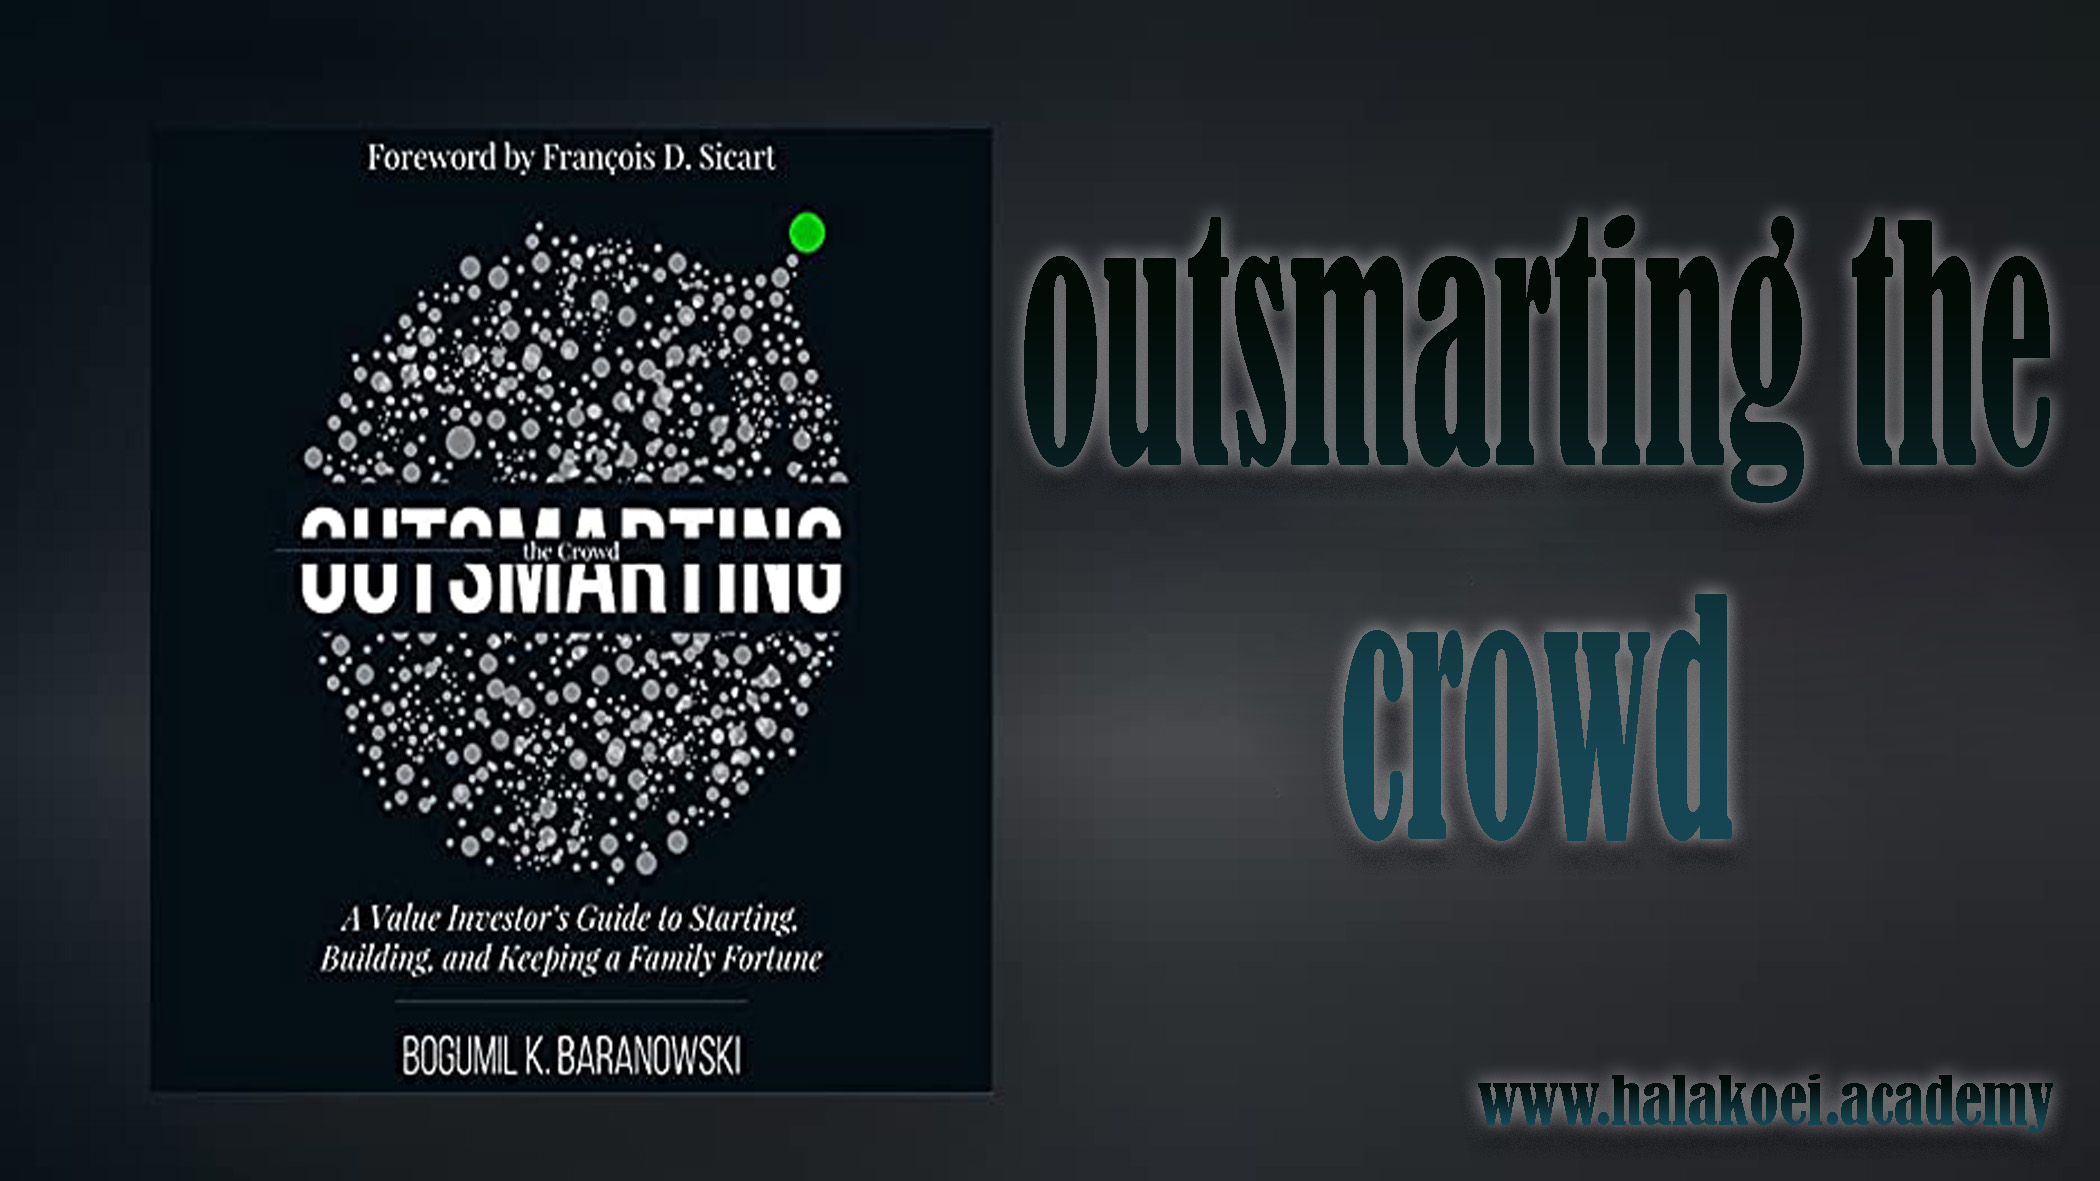 outsmarting-the-crowd